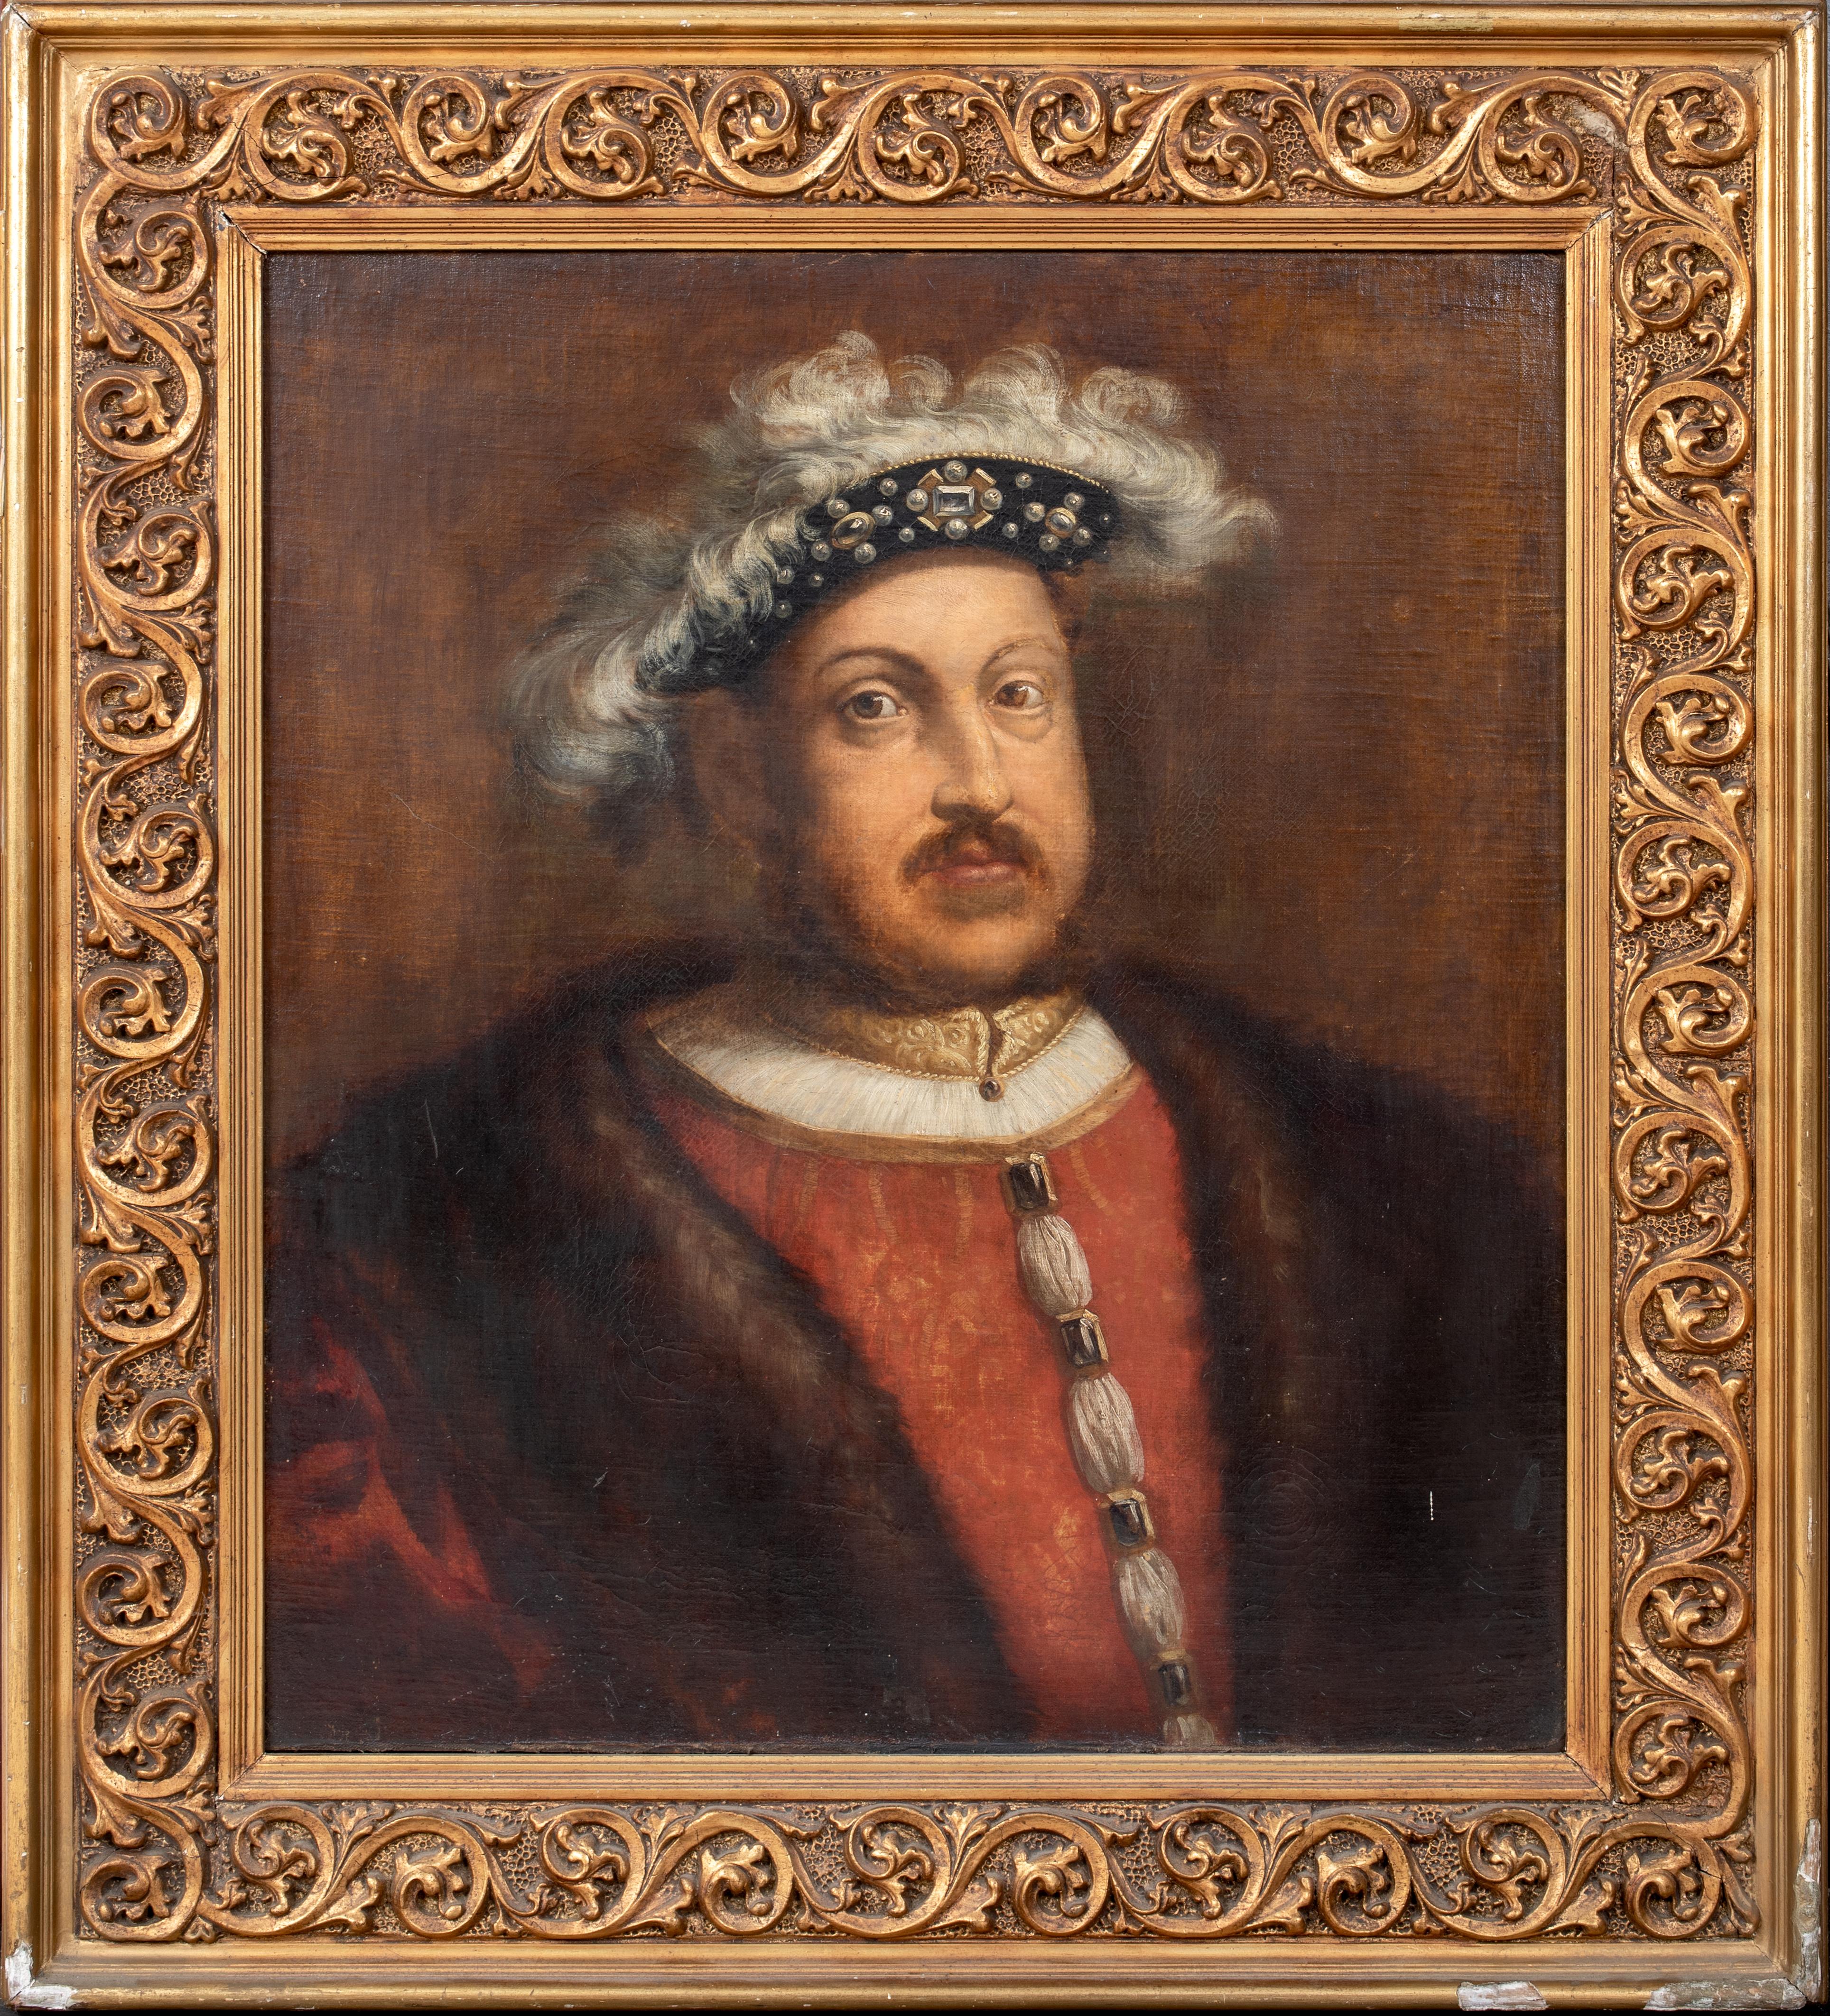 Portrait Of A King Henry VIII (1491-1547), 17th Century  - Painting by Unknown